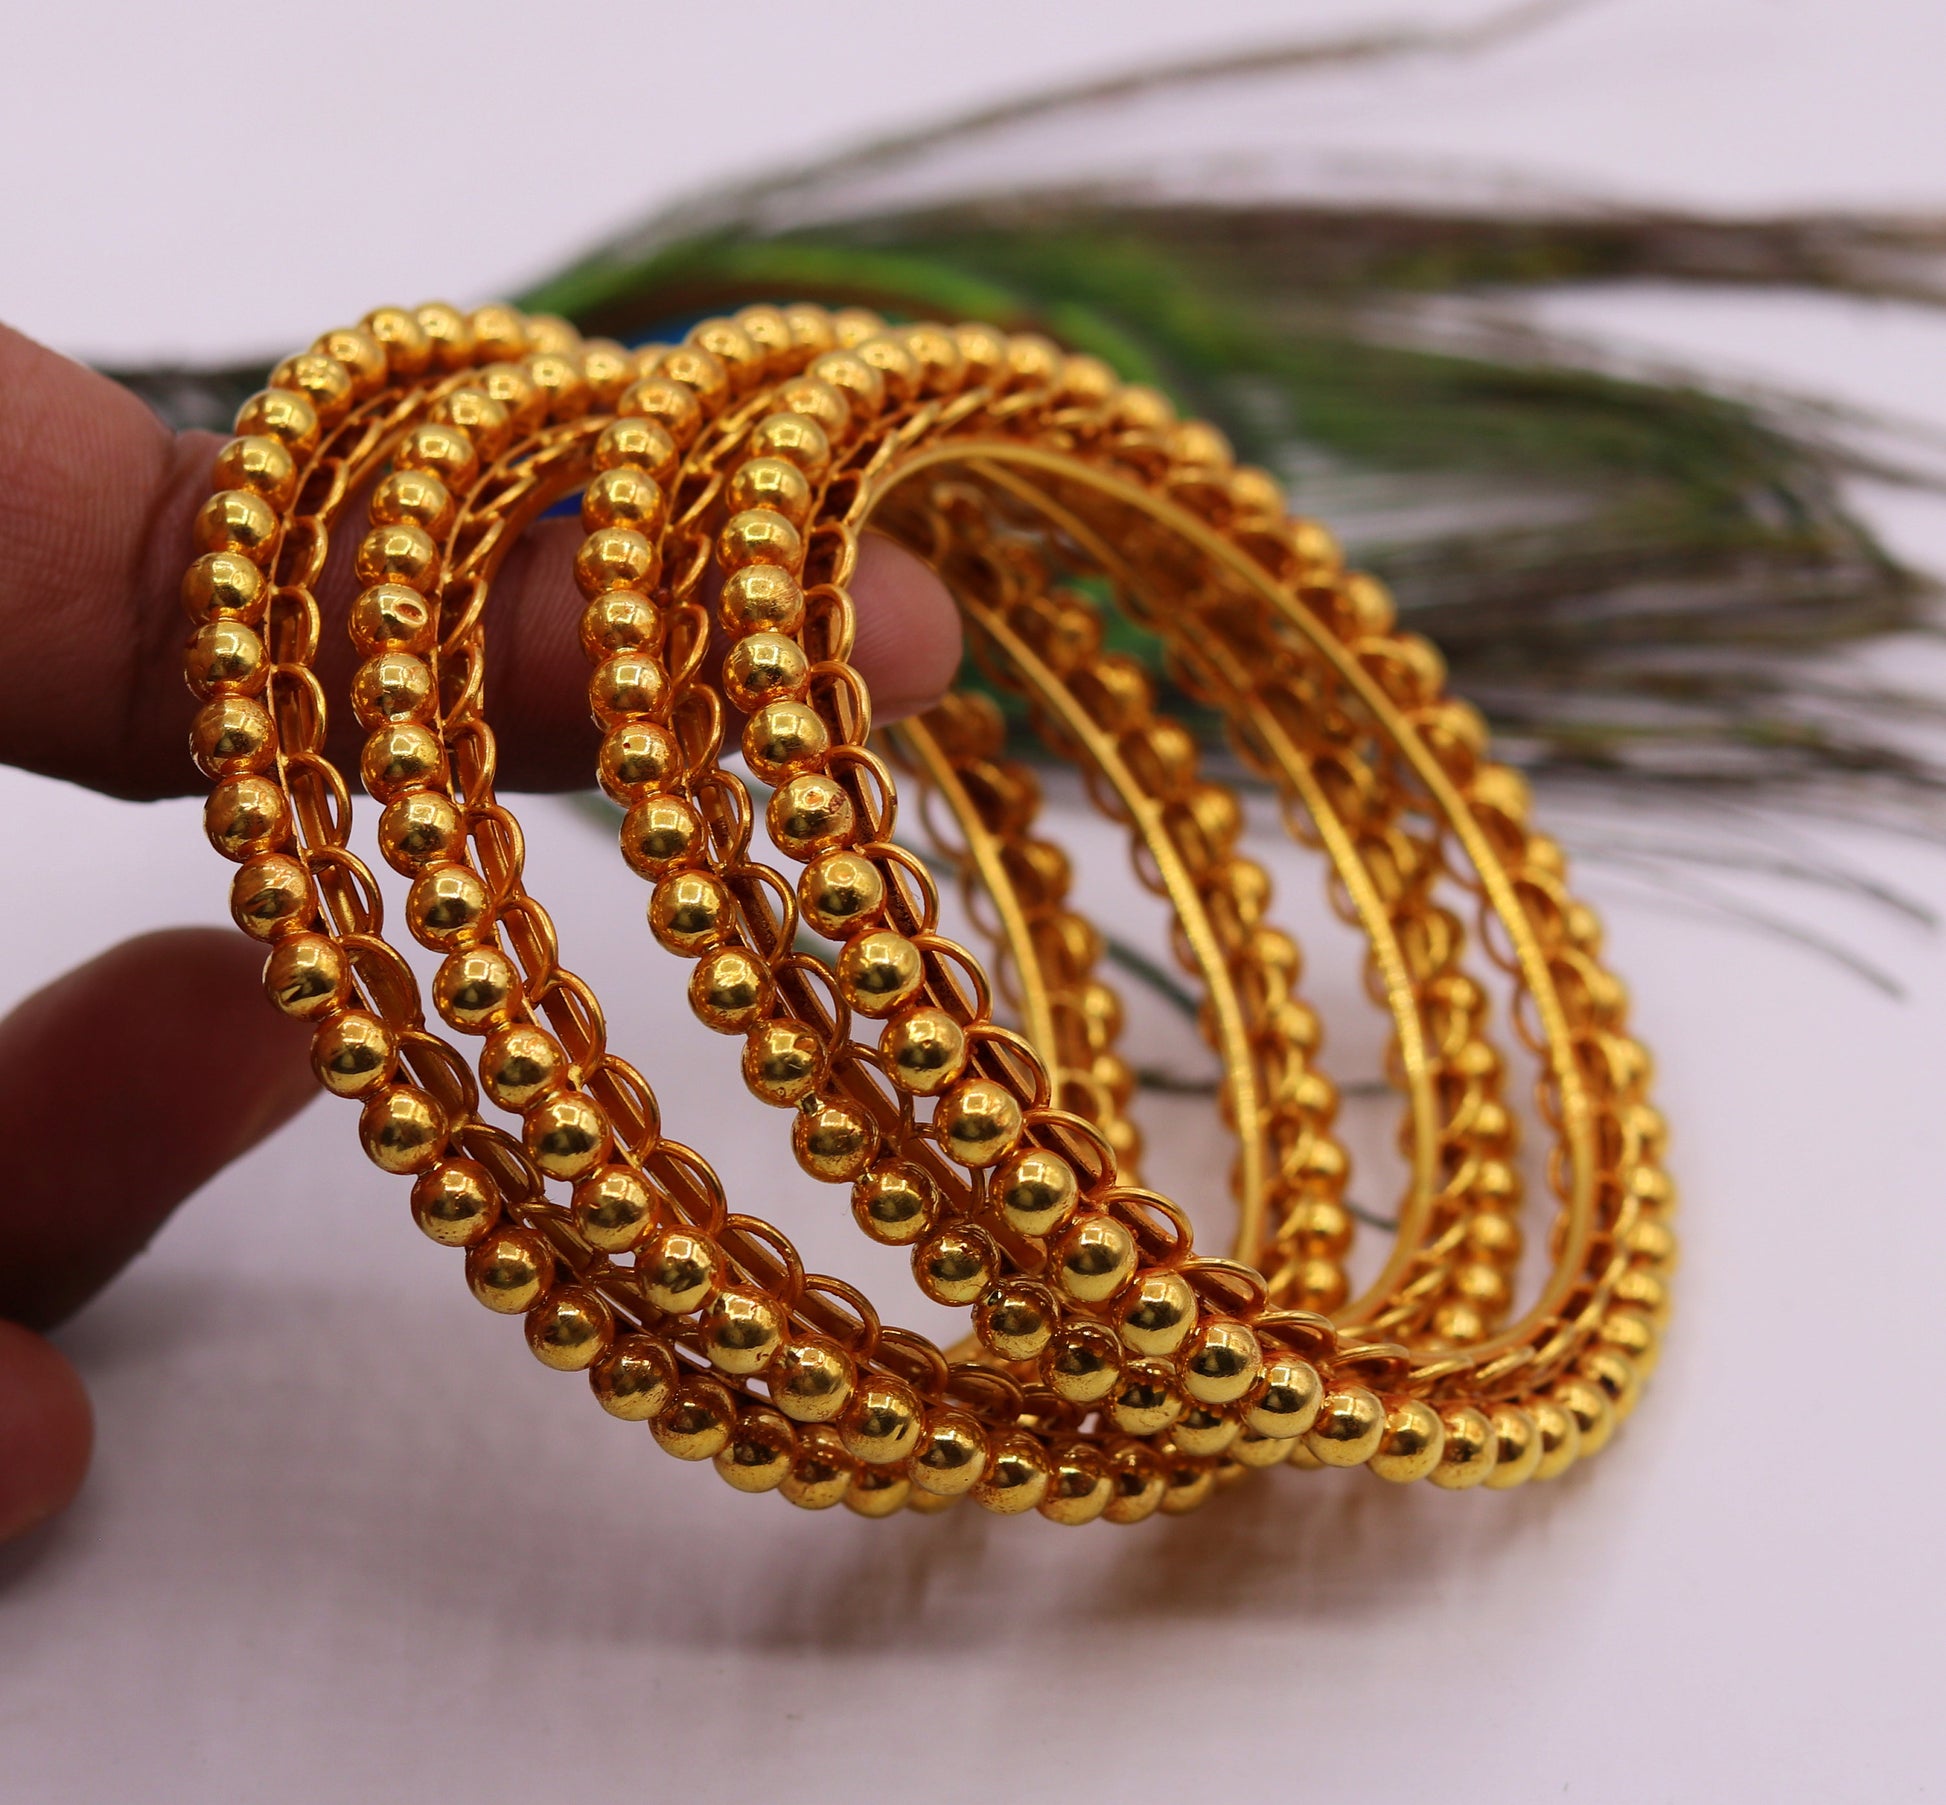 Handmade indian Designer antique style solid gold bangle bracelet fabulous women's traditional tribal jewelry from india ba43 - TRIBAL ORNAMENTS